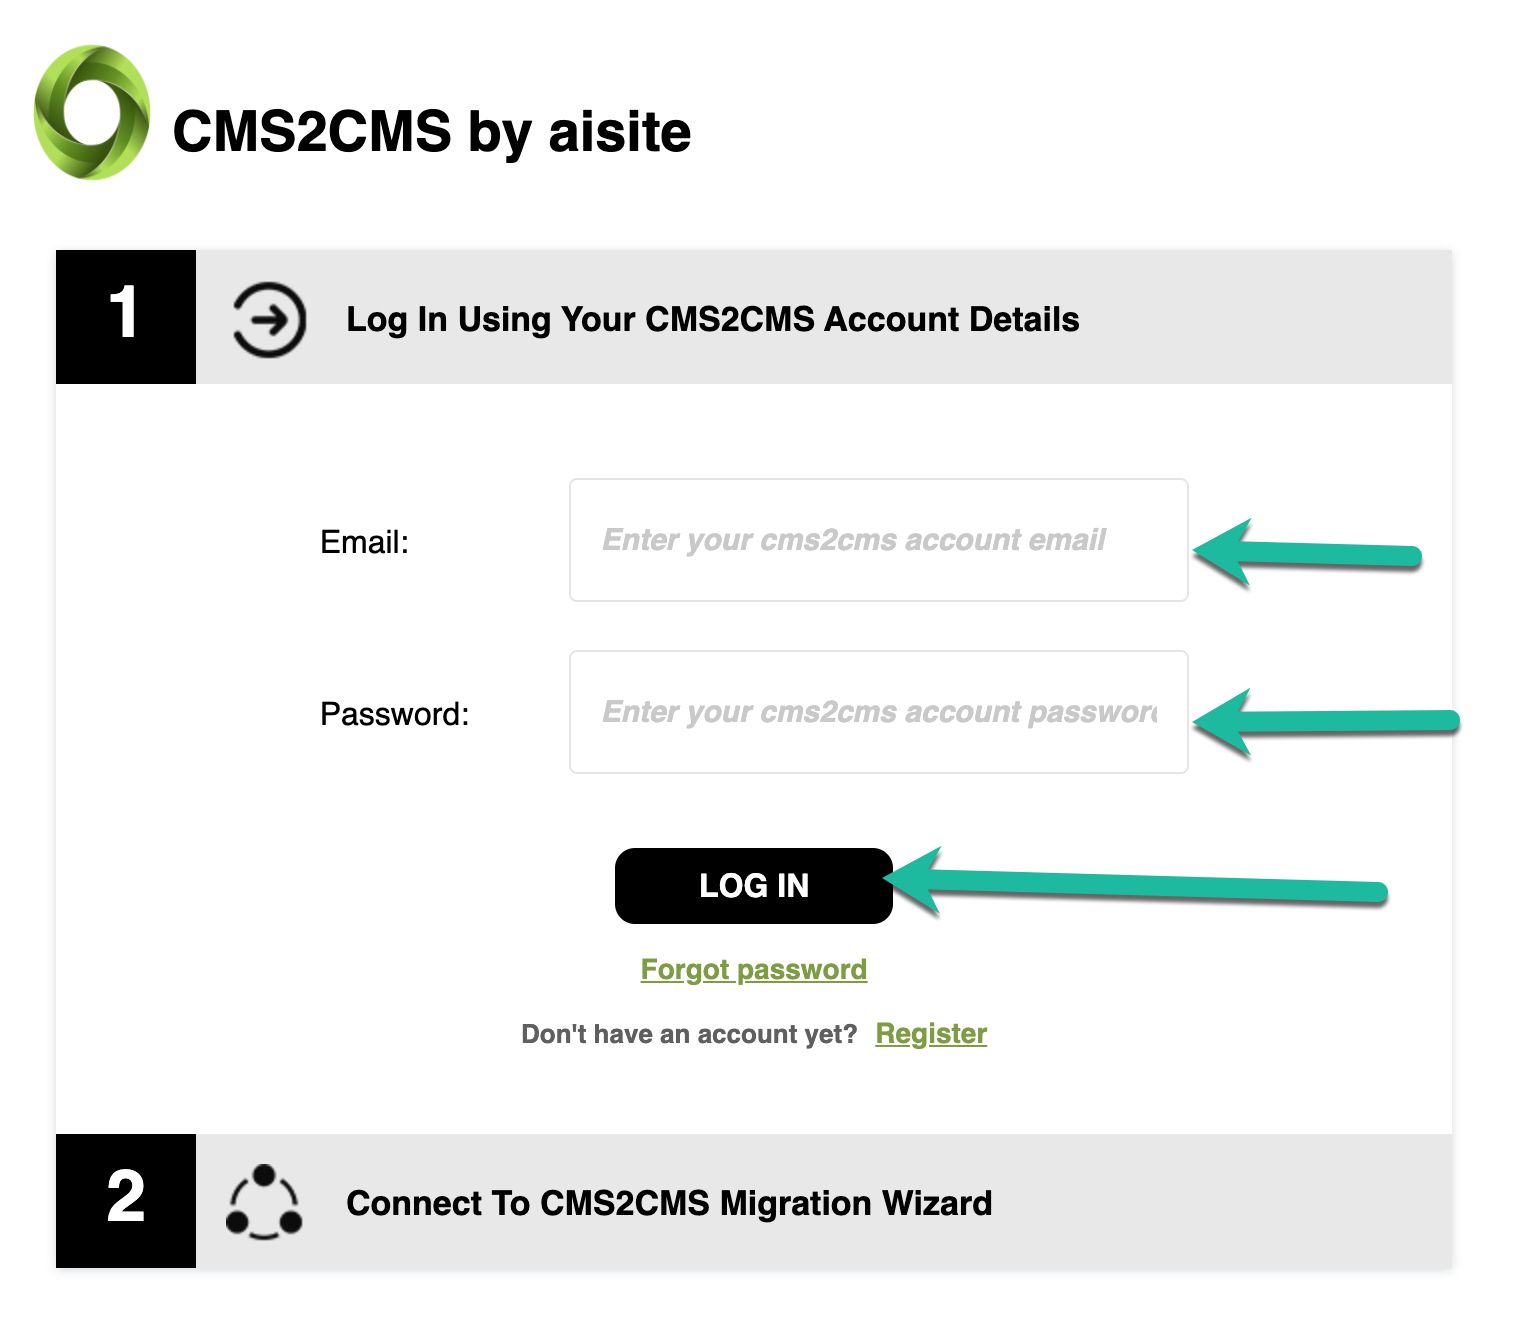 You will see a page where you need to enter your CMS2CMS credentials (remember they emailed a password to you) and log in.